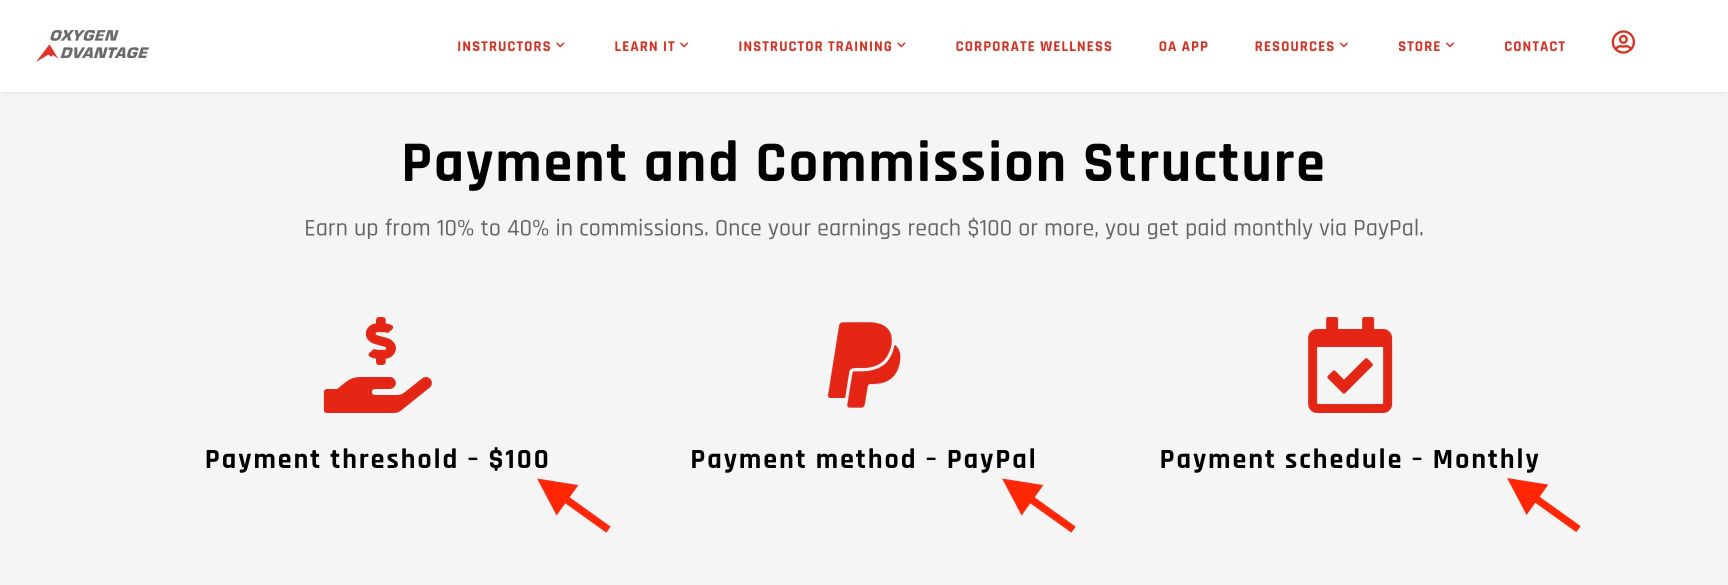 5 Payment and Commission Structure